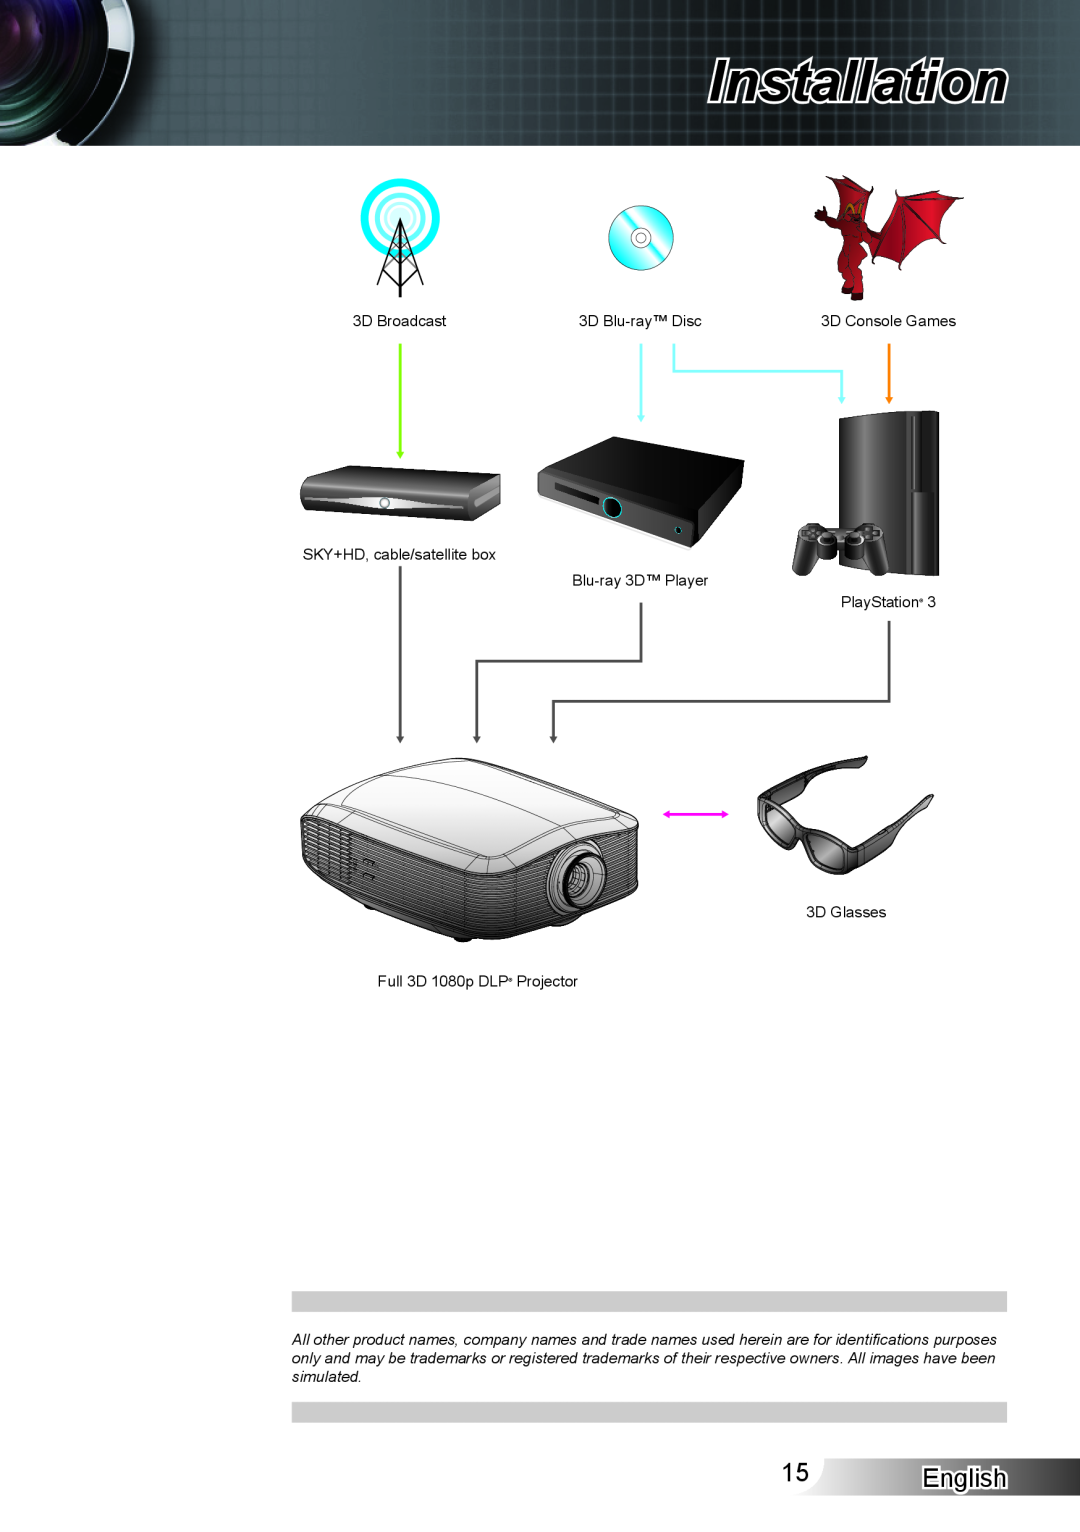 Optoma Technology XX152 N manual 5 English, Installation, 3D Broadcast, 3D Blu-ray Disc, 3D Console Games 